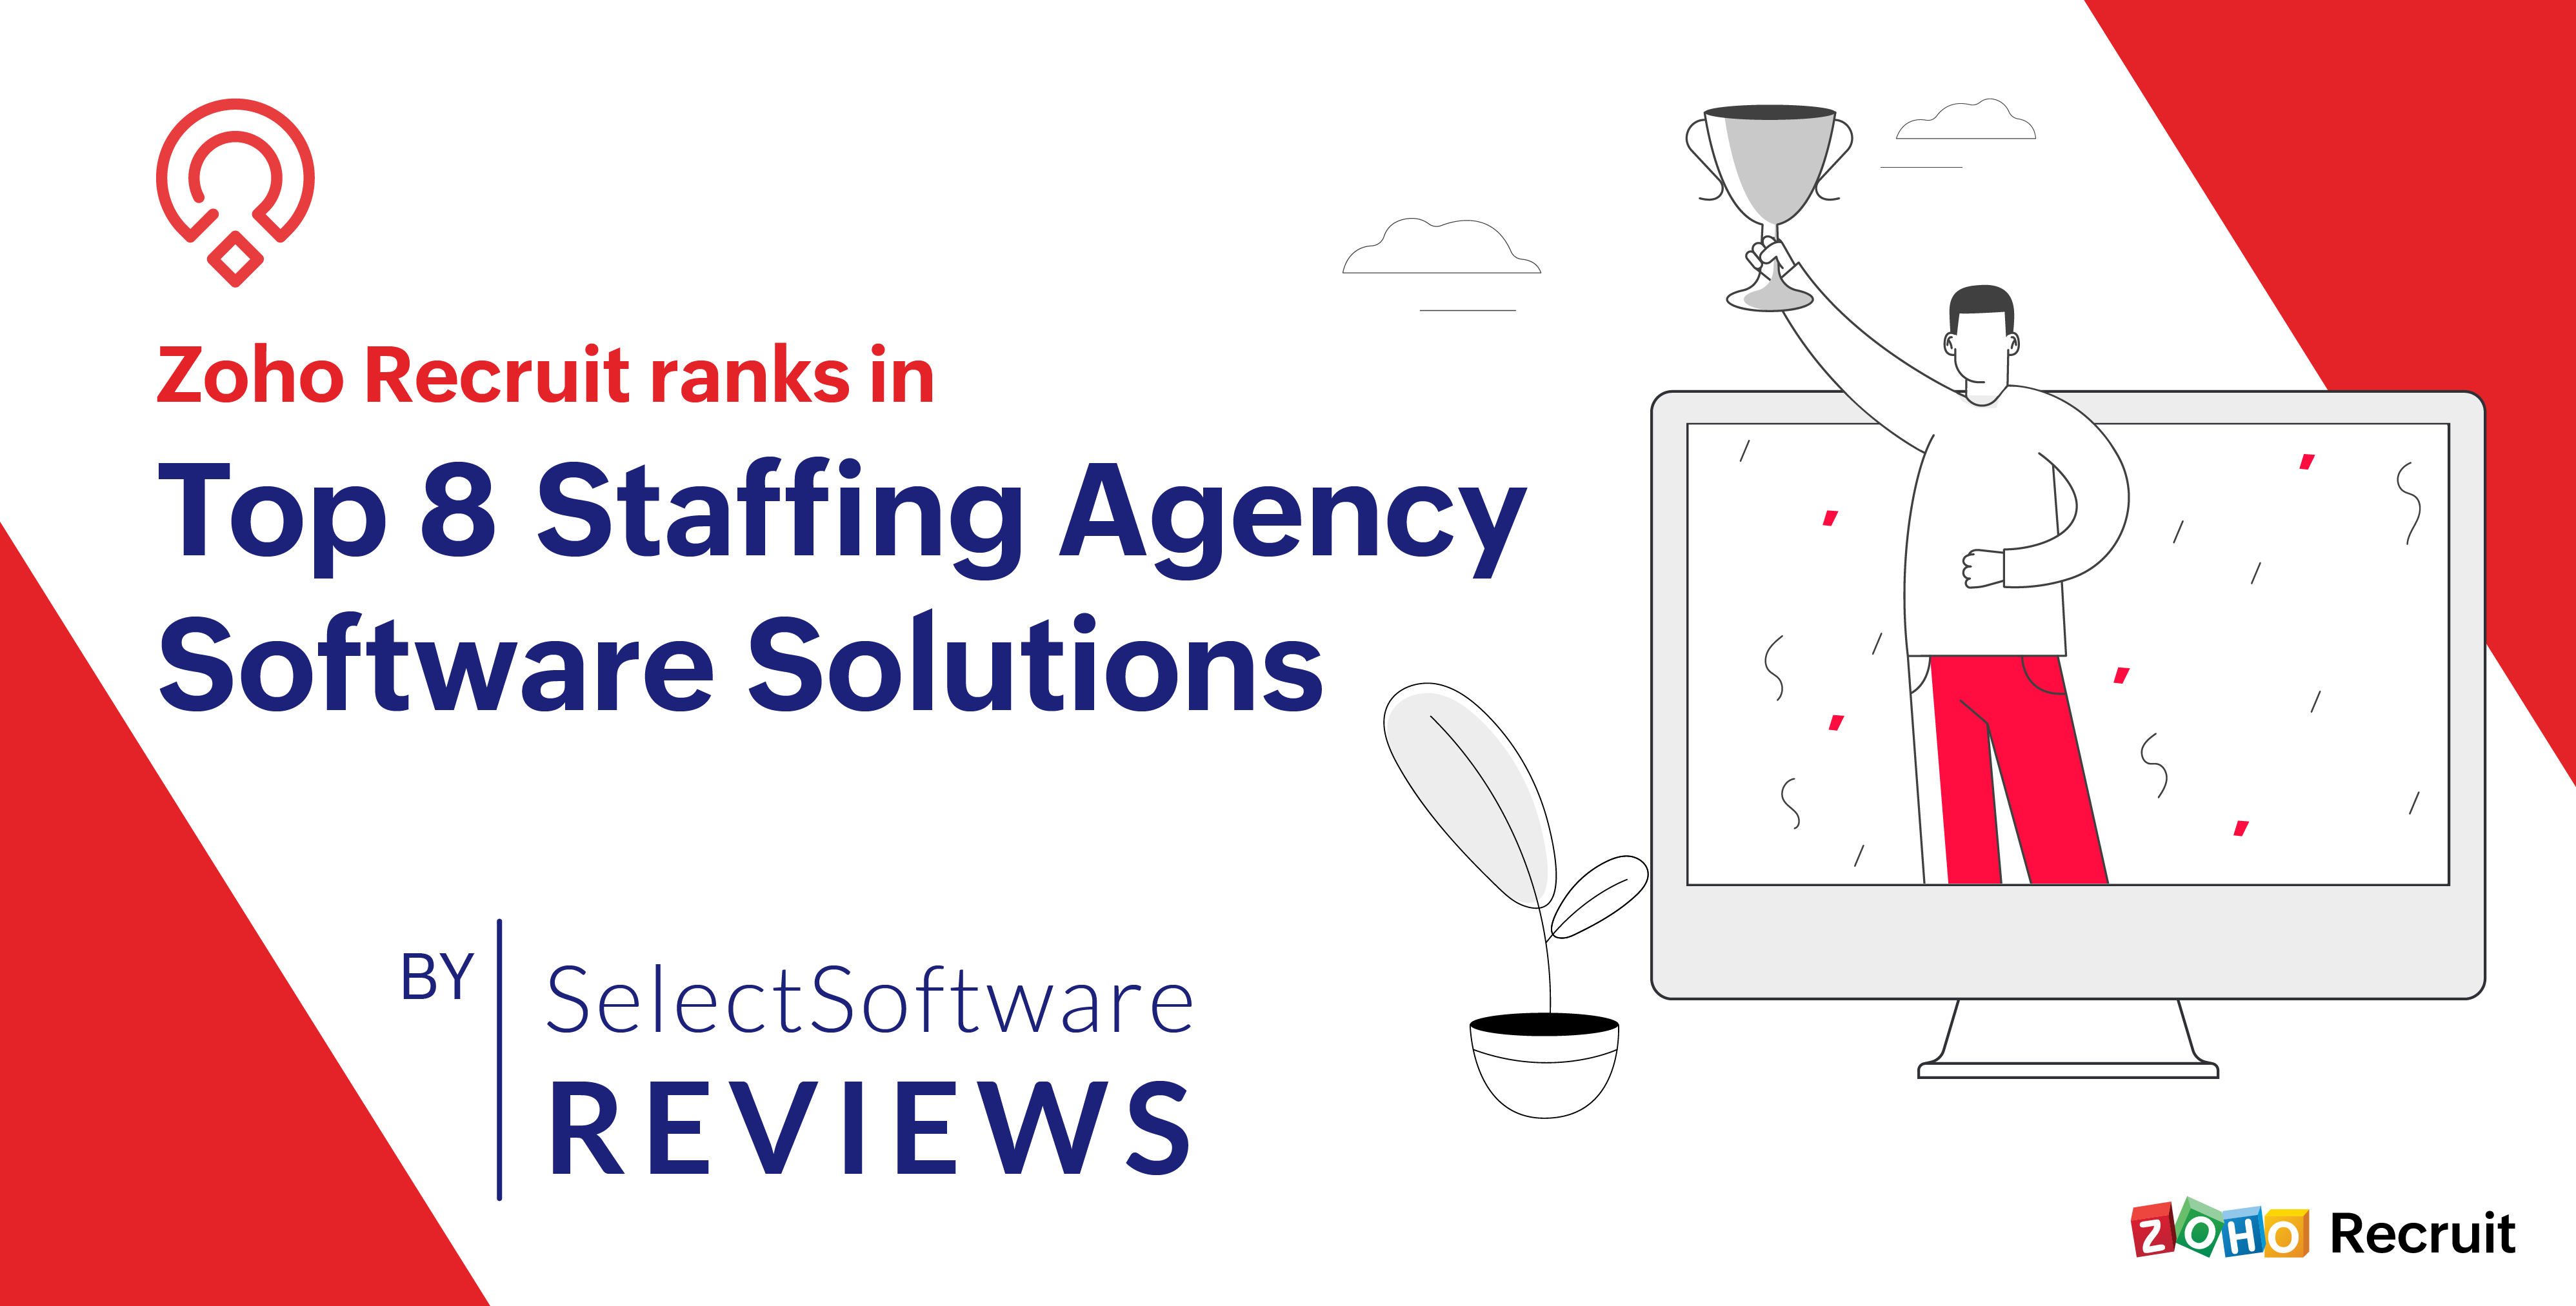 Zoho Recruit ranks in "Top 8 Staffing Agency Software Solutions" by SoftwareSelect Reviews